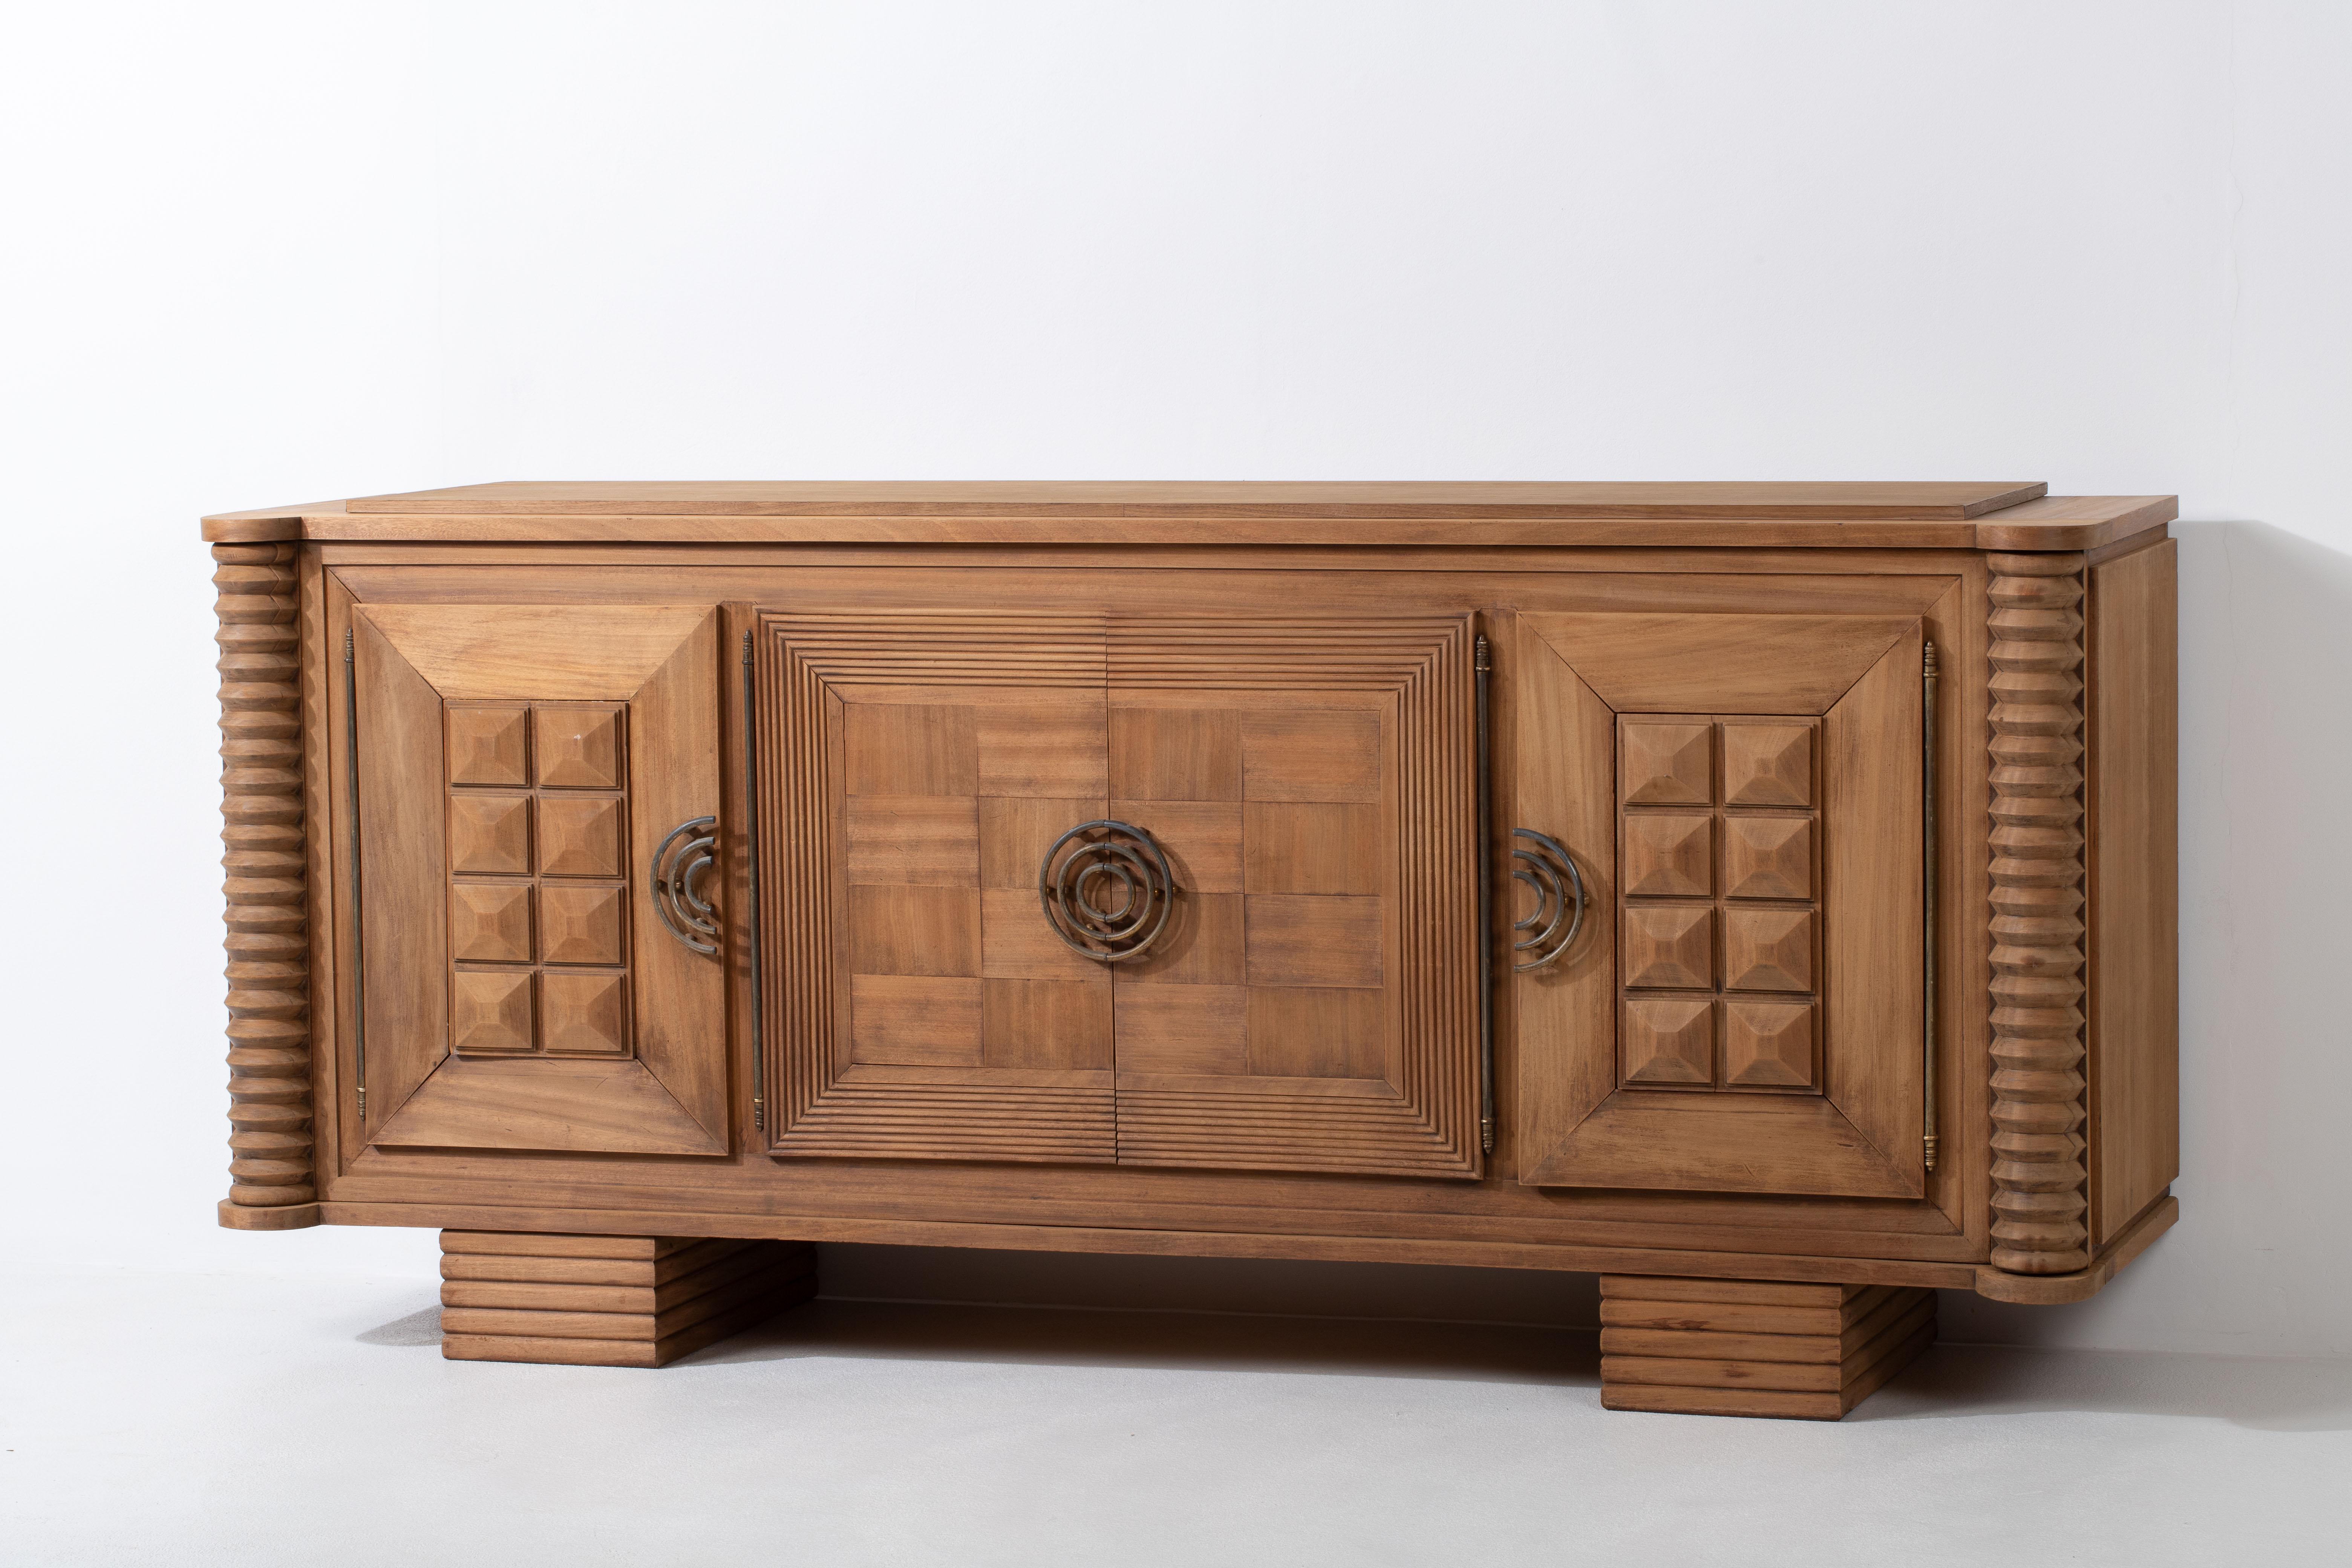 Introducing a captivating sculptural buffet, which draws inspiration from the renowned designer Charles Dudouyt. Dudouyt, a celebrated figure in the world of French furniture design, was known for his exceptional craftsmanship and innovative vision.